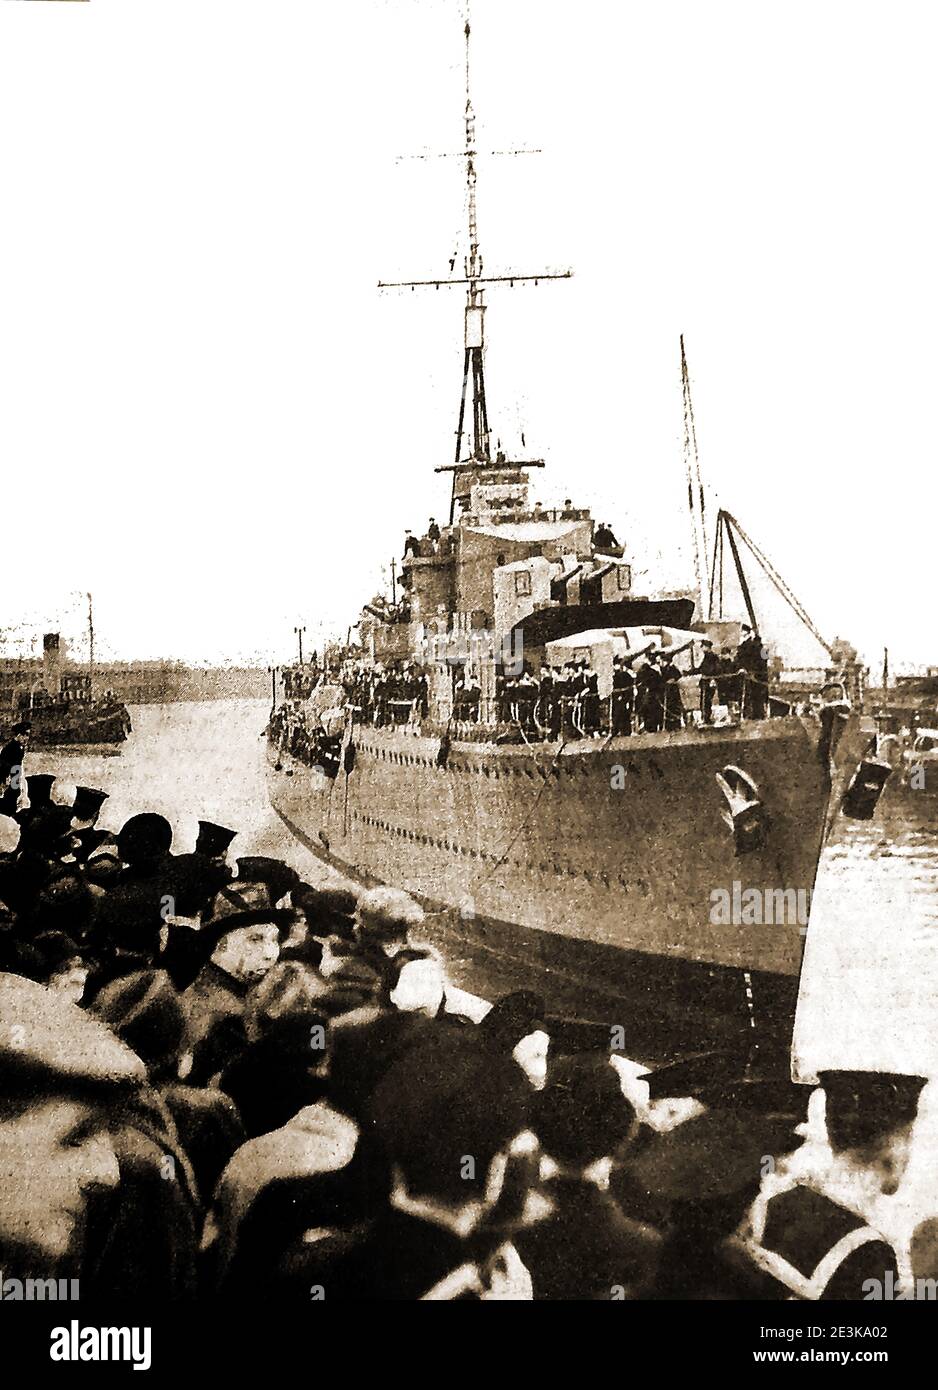 1940's. THE ALTMARK INCIDENT-      HMS Cossack arrives in Britain (Leith) with 300 British  seamen released from the German Ship Altmark near the Jøssingfjord in Norway. The prisoners were survivors  from various ships sunk by the Admiral Graf Spee). HMS Cossack was a Tribal-class destroyer that became famous for the boarding of the German supply ship Altmark in Norwegian waters, and the freeing of sailors originally captured by the Admiral Graf Spee. The Cossack was torpedoed by the German submarine U-563 on 23 October 1941, and sank four days later. Stock Photo